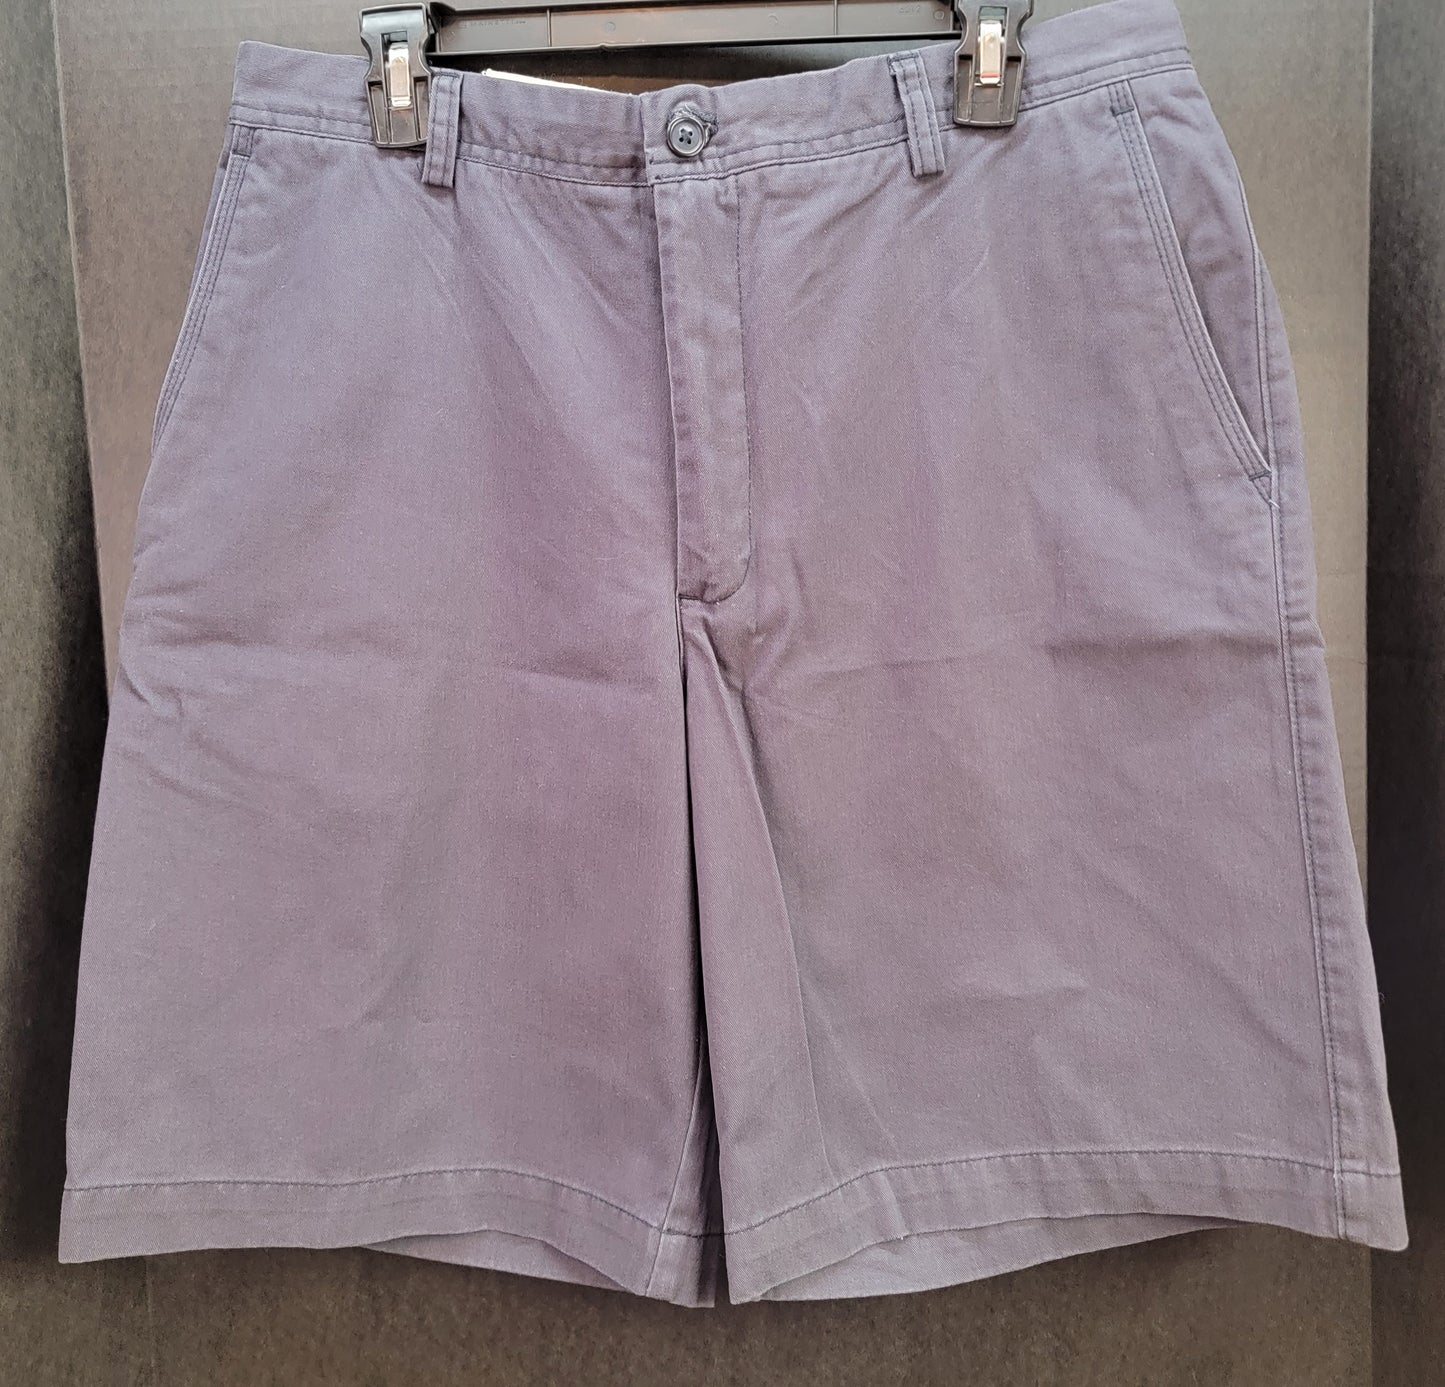 Izod Men's Shorts Size 34 100% Cotton Weathered Twill Color Spring Retail $38 NWT